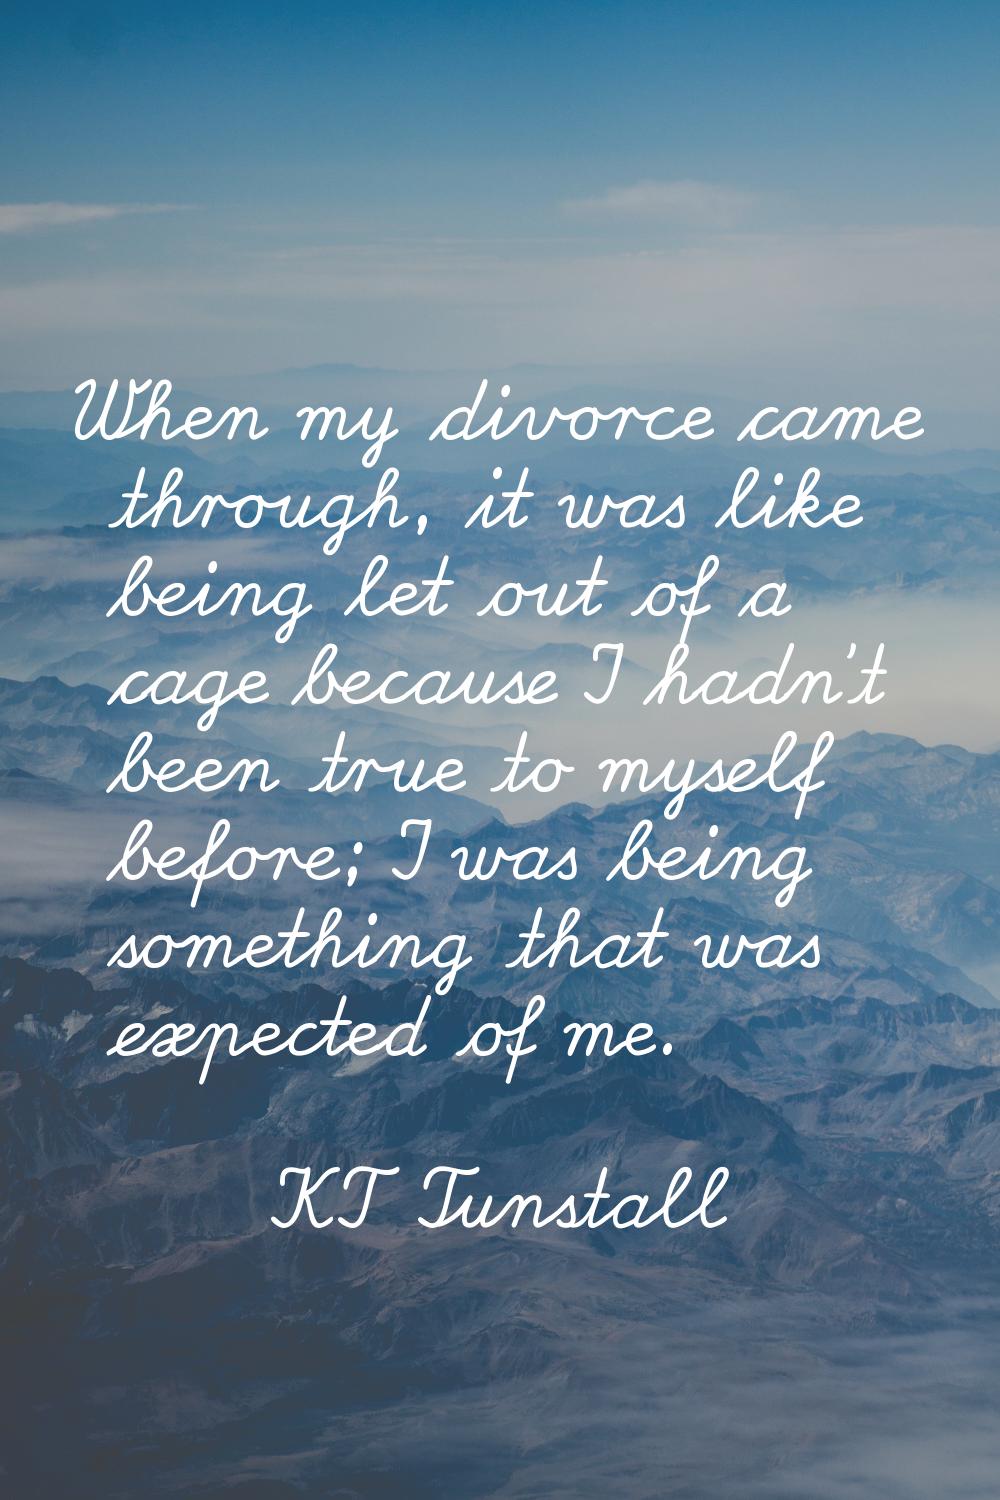 When my divorce came through, it was like being let out of a cage because I hadn't been true to mys